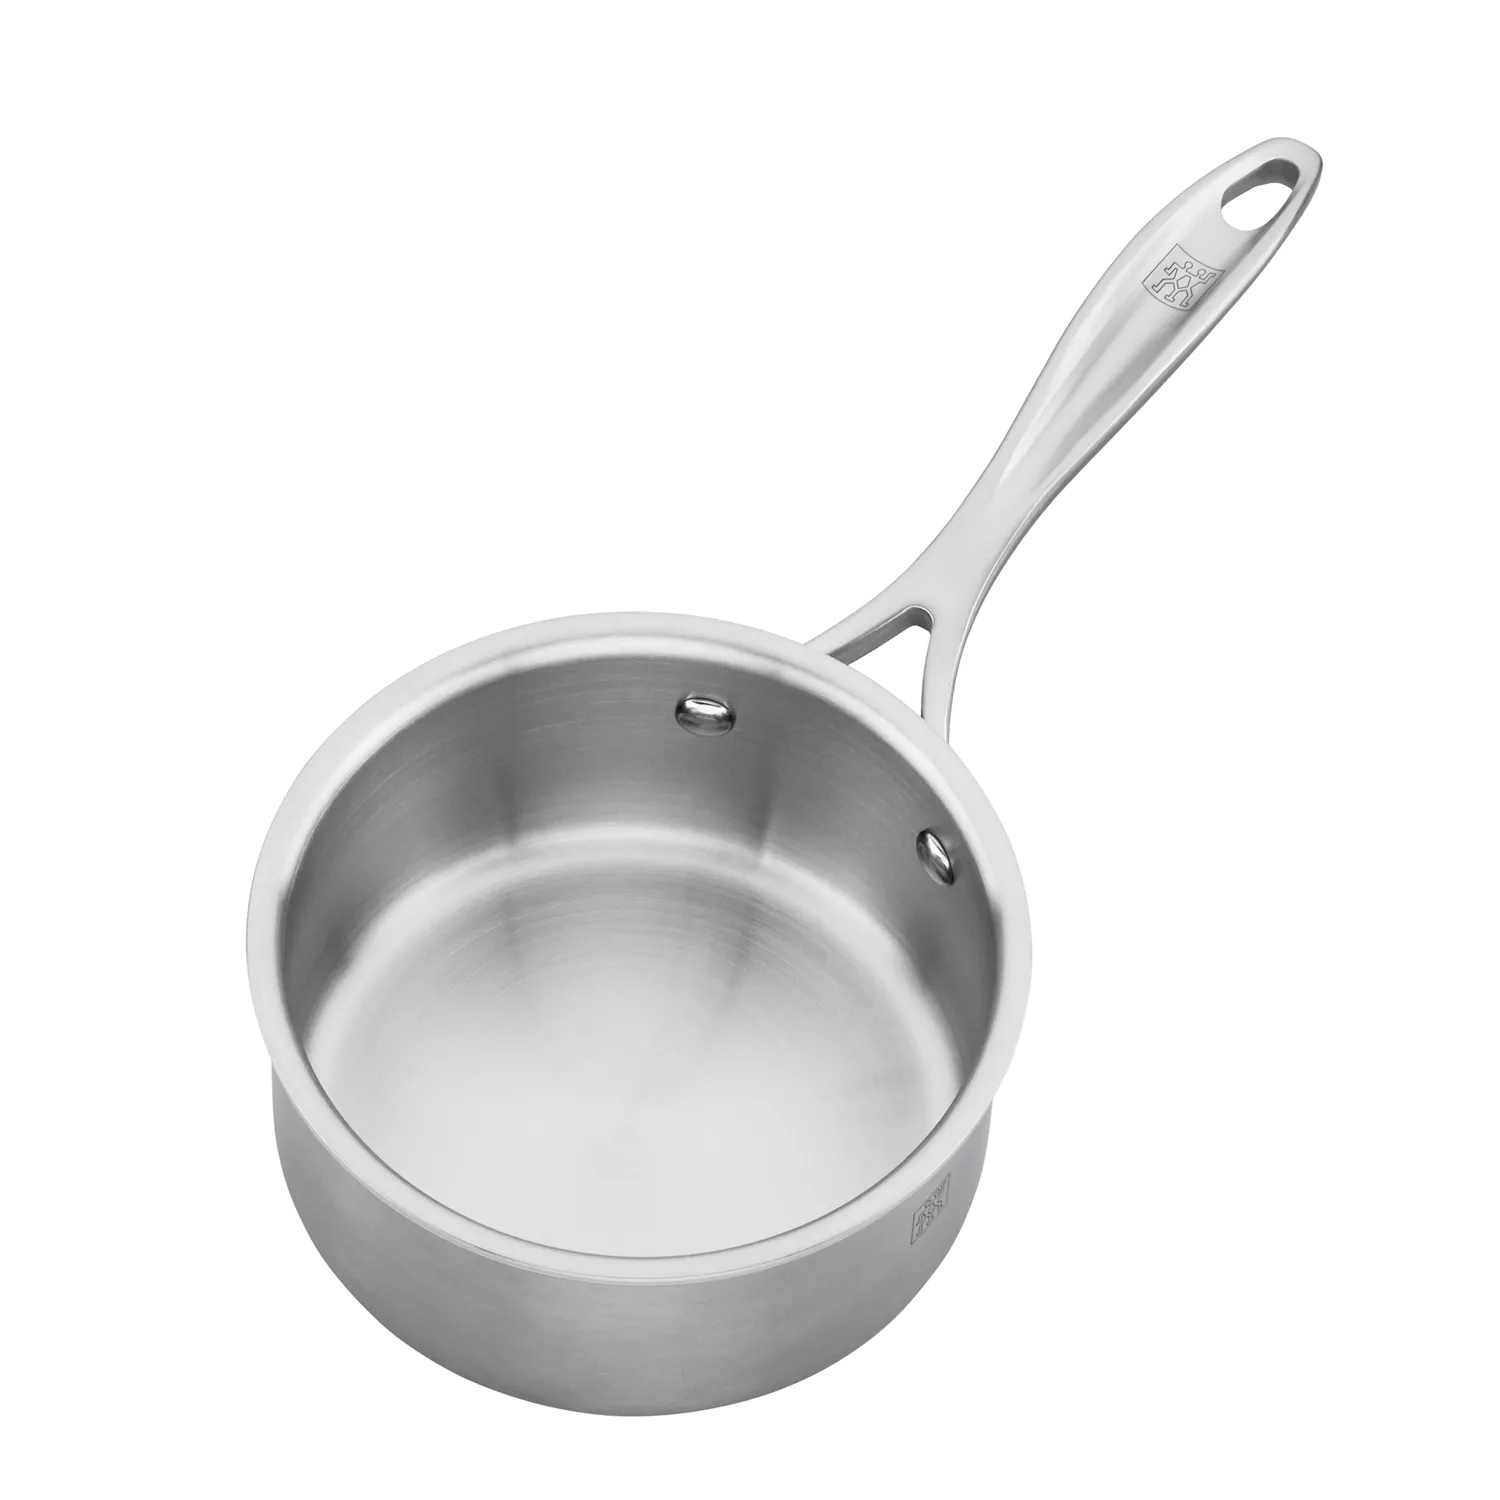 ZWILLING J.A. Henckels Zwilling 2 qt. Stainless Steel Saucepan